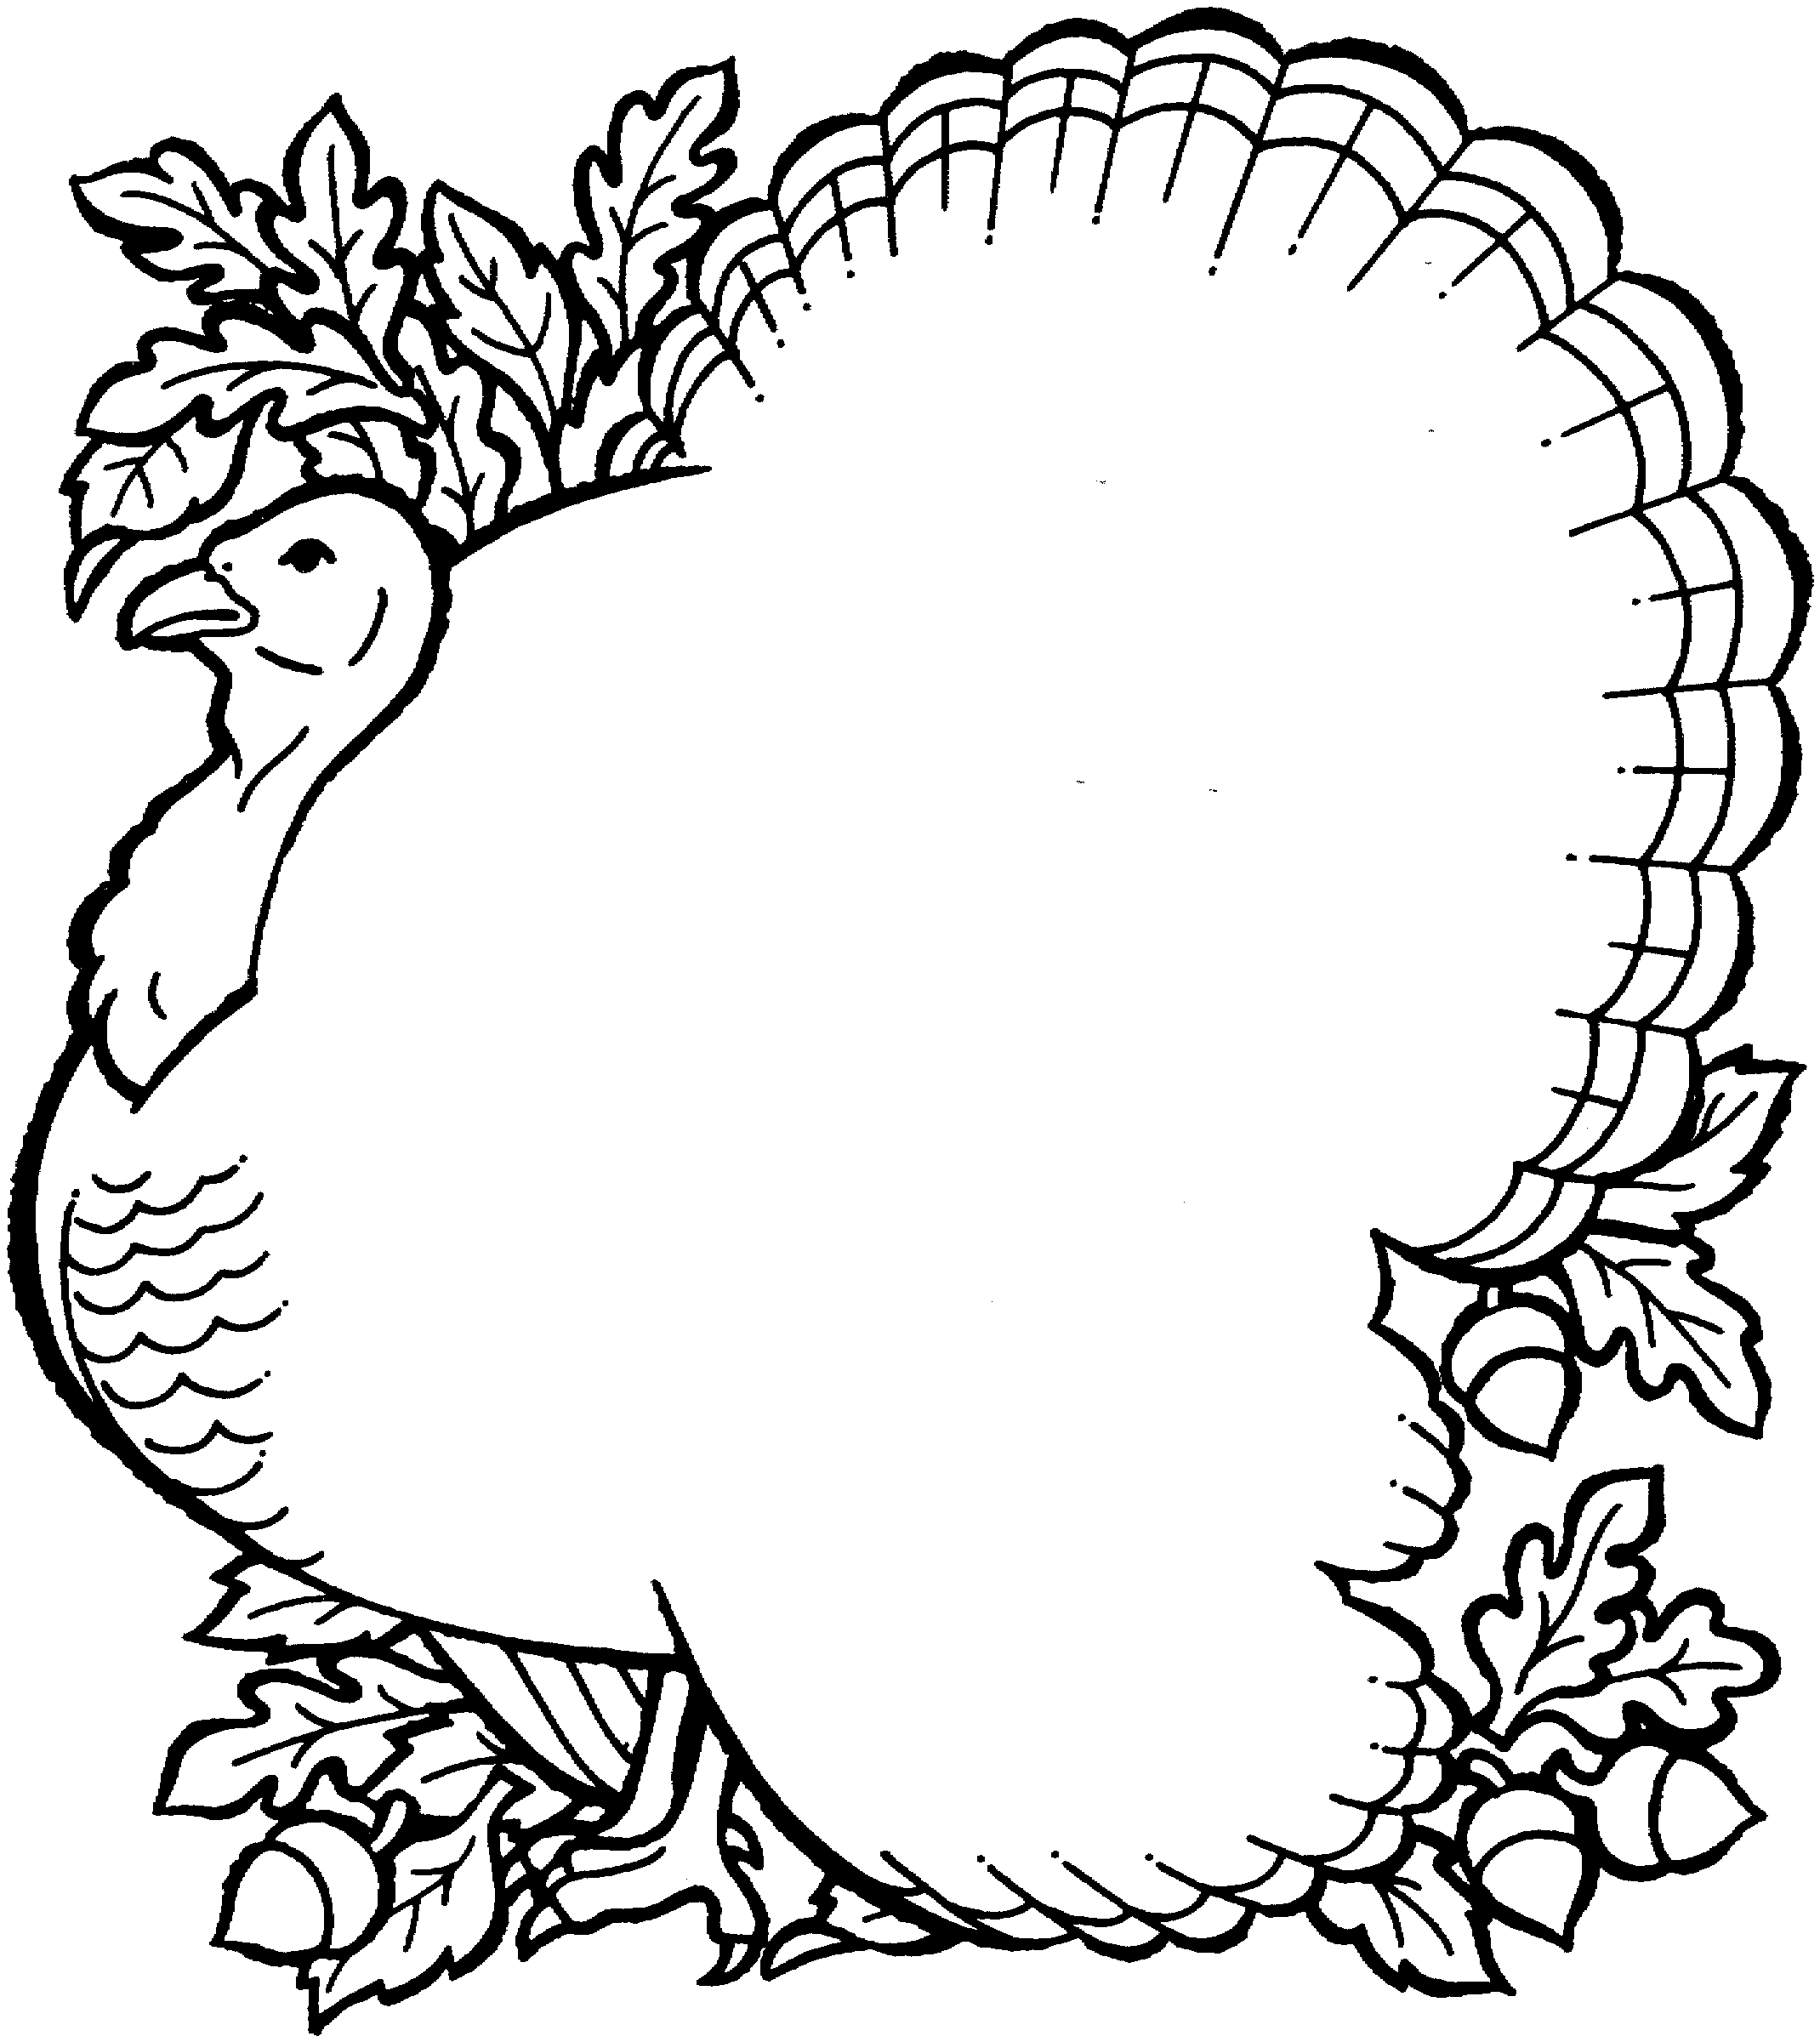 Free Turkey Coloring Pages